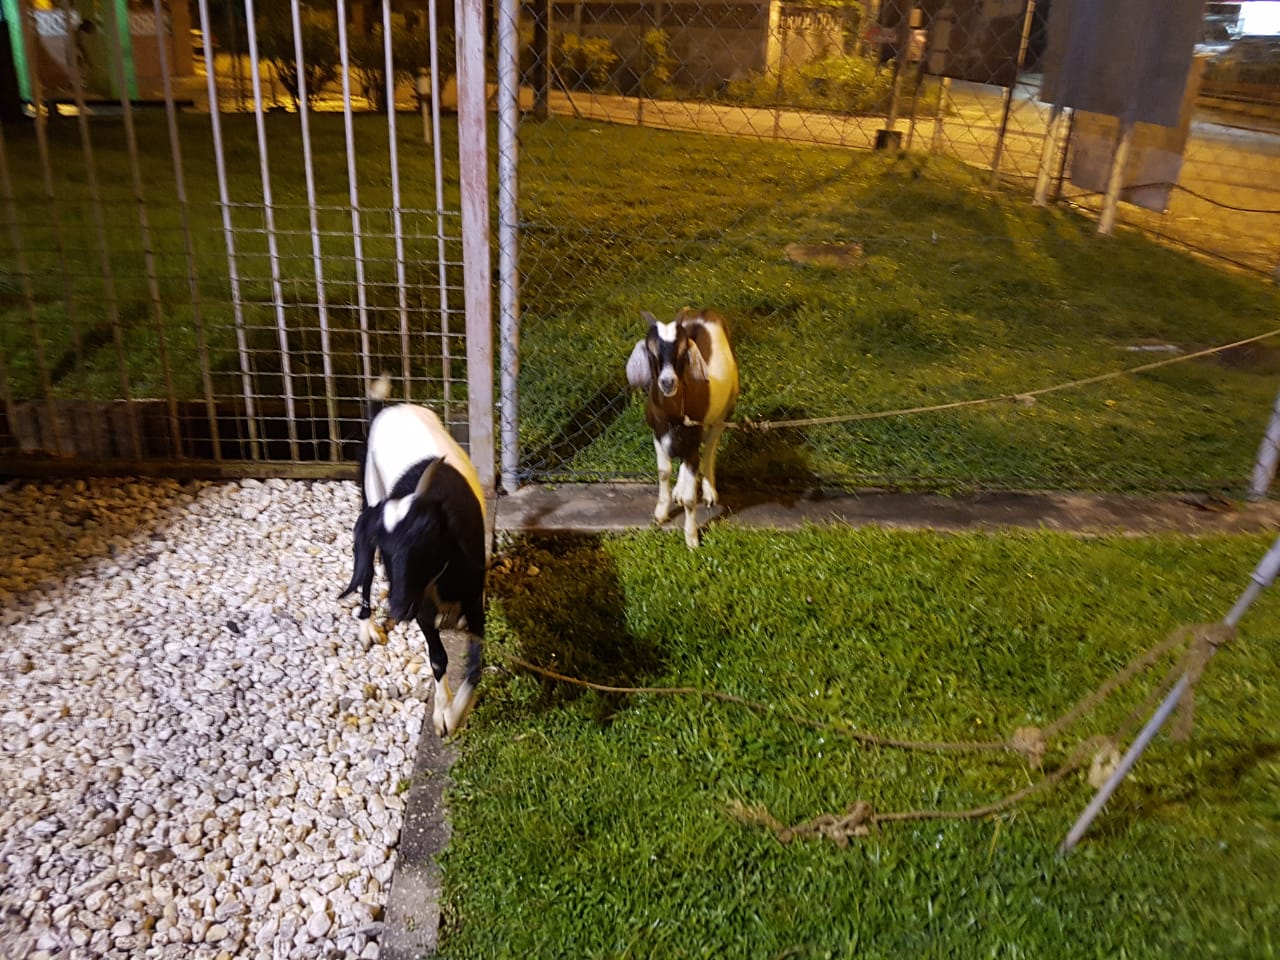 Two men arrested for stealing goats in Penal